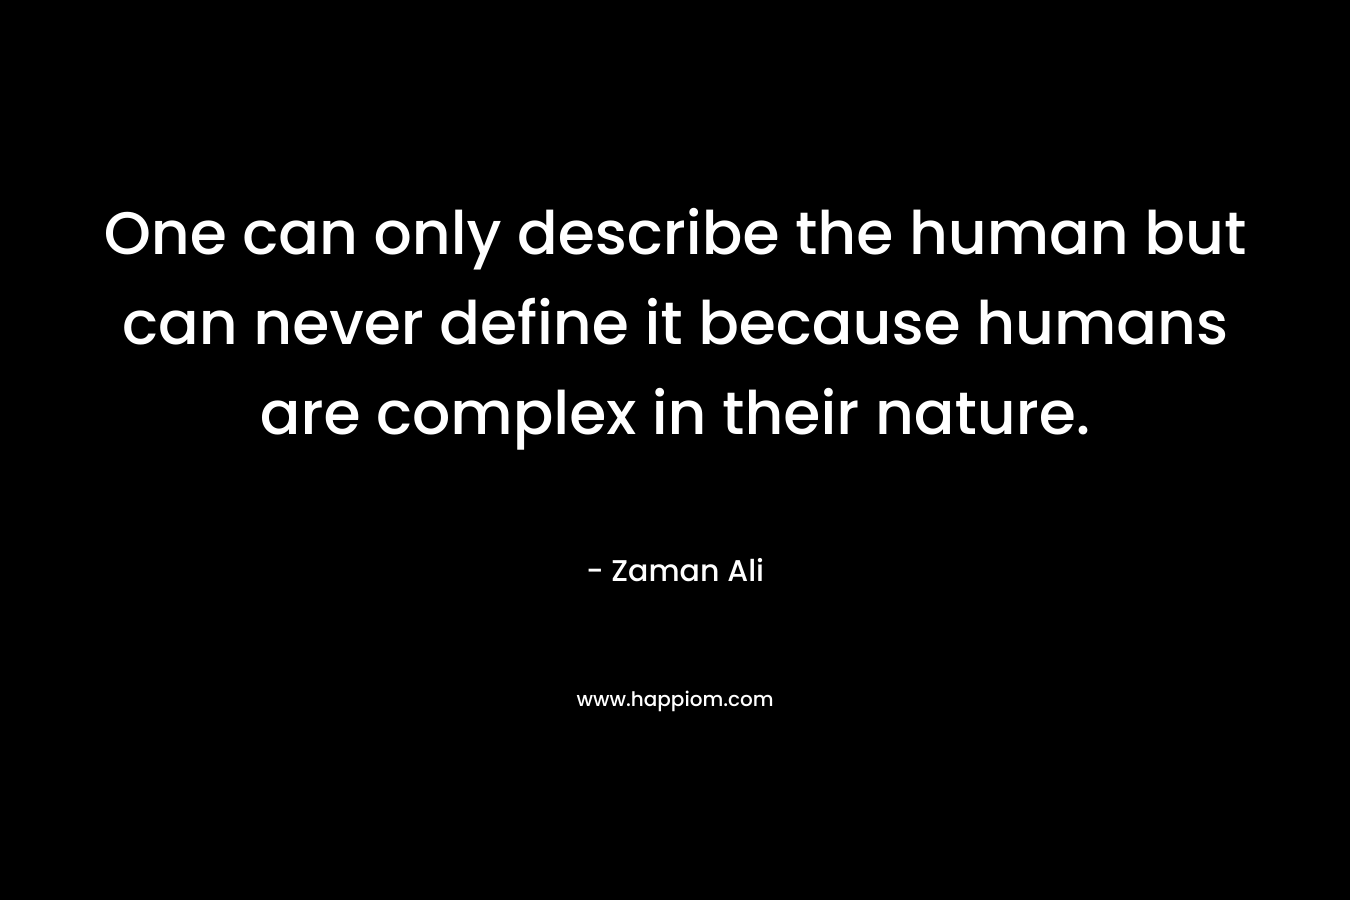 One can only describe the human but can never define it because humans are complex in their nature.